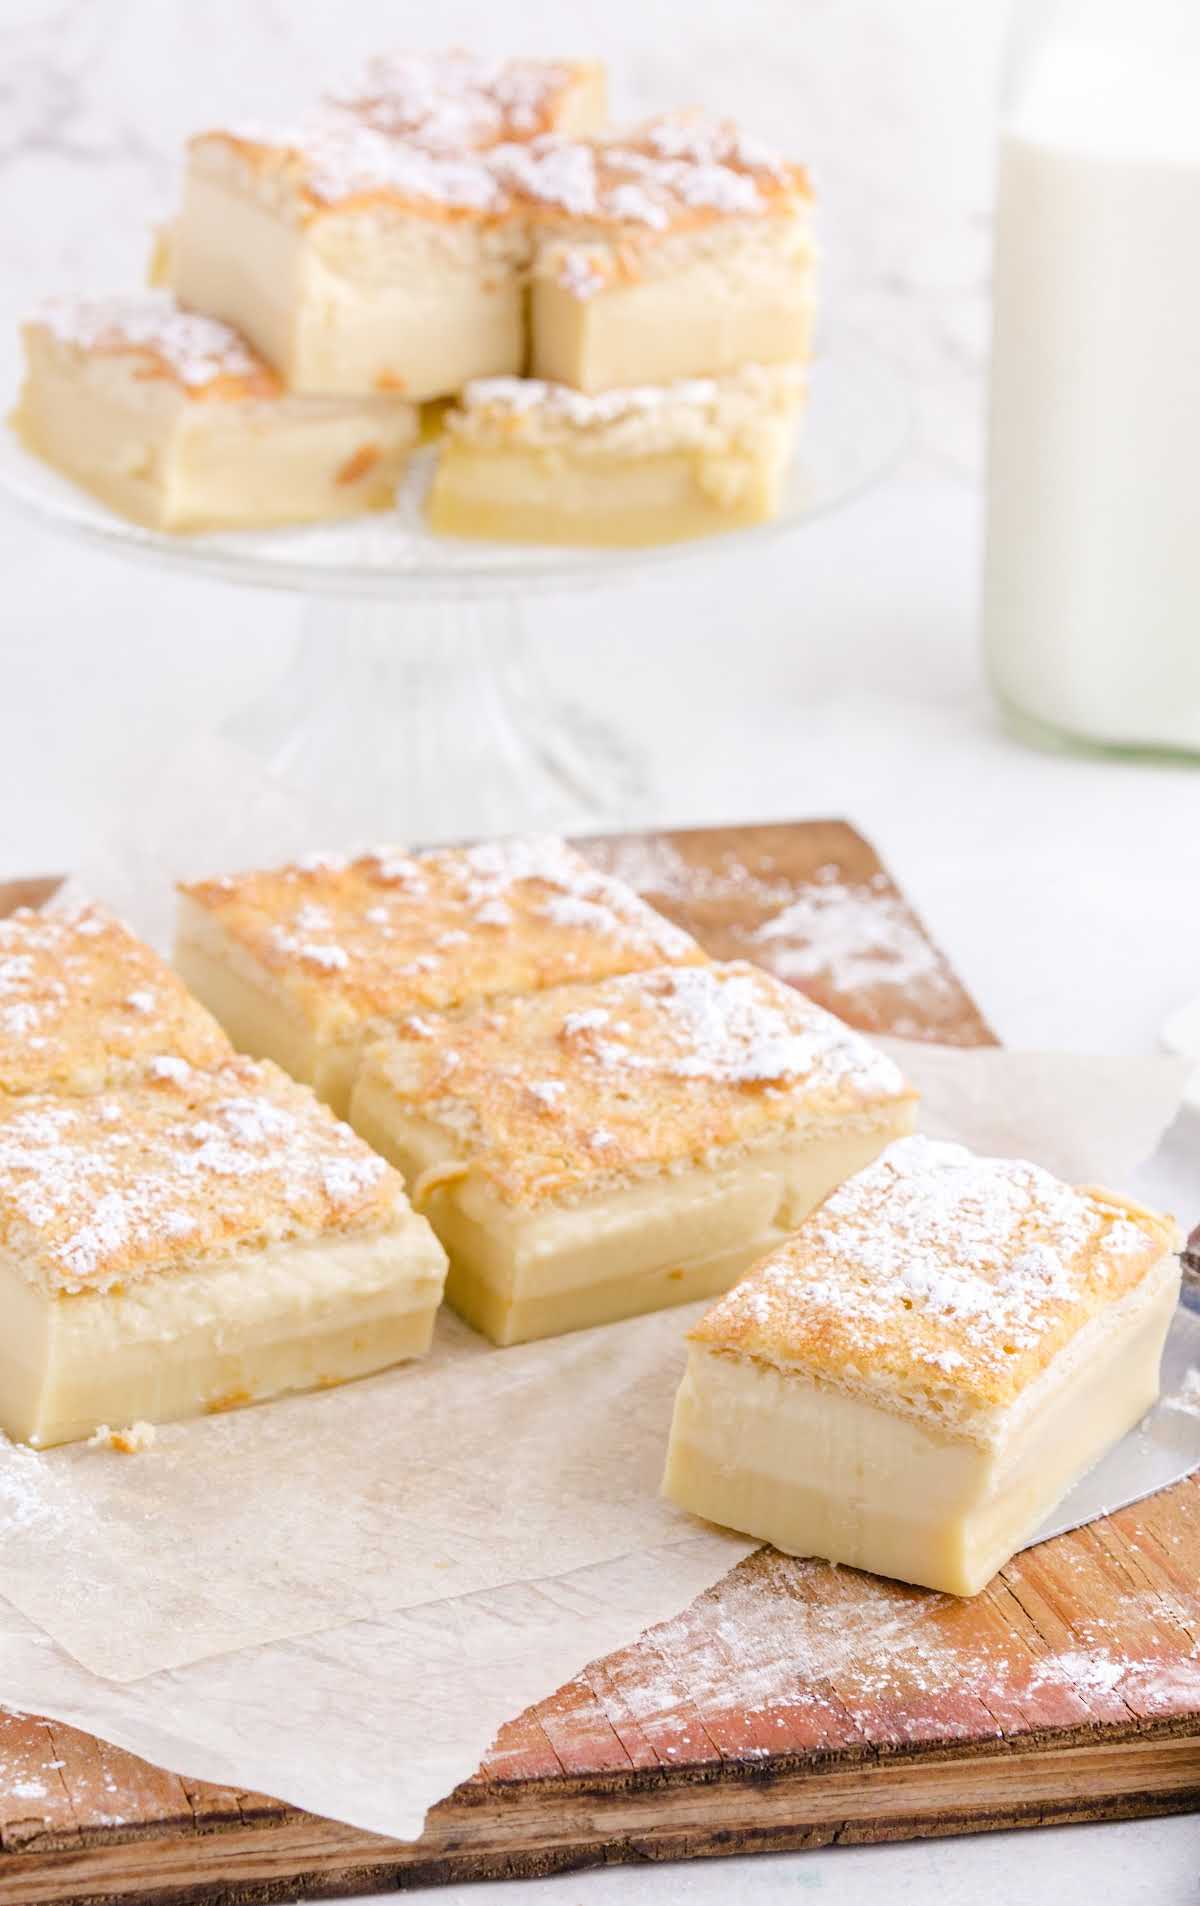 slices of Magic Custard Cake on a wooden board